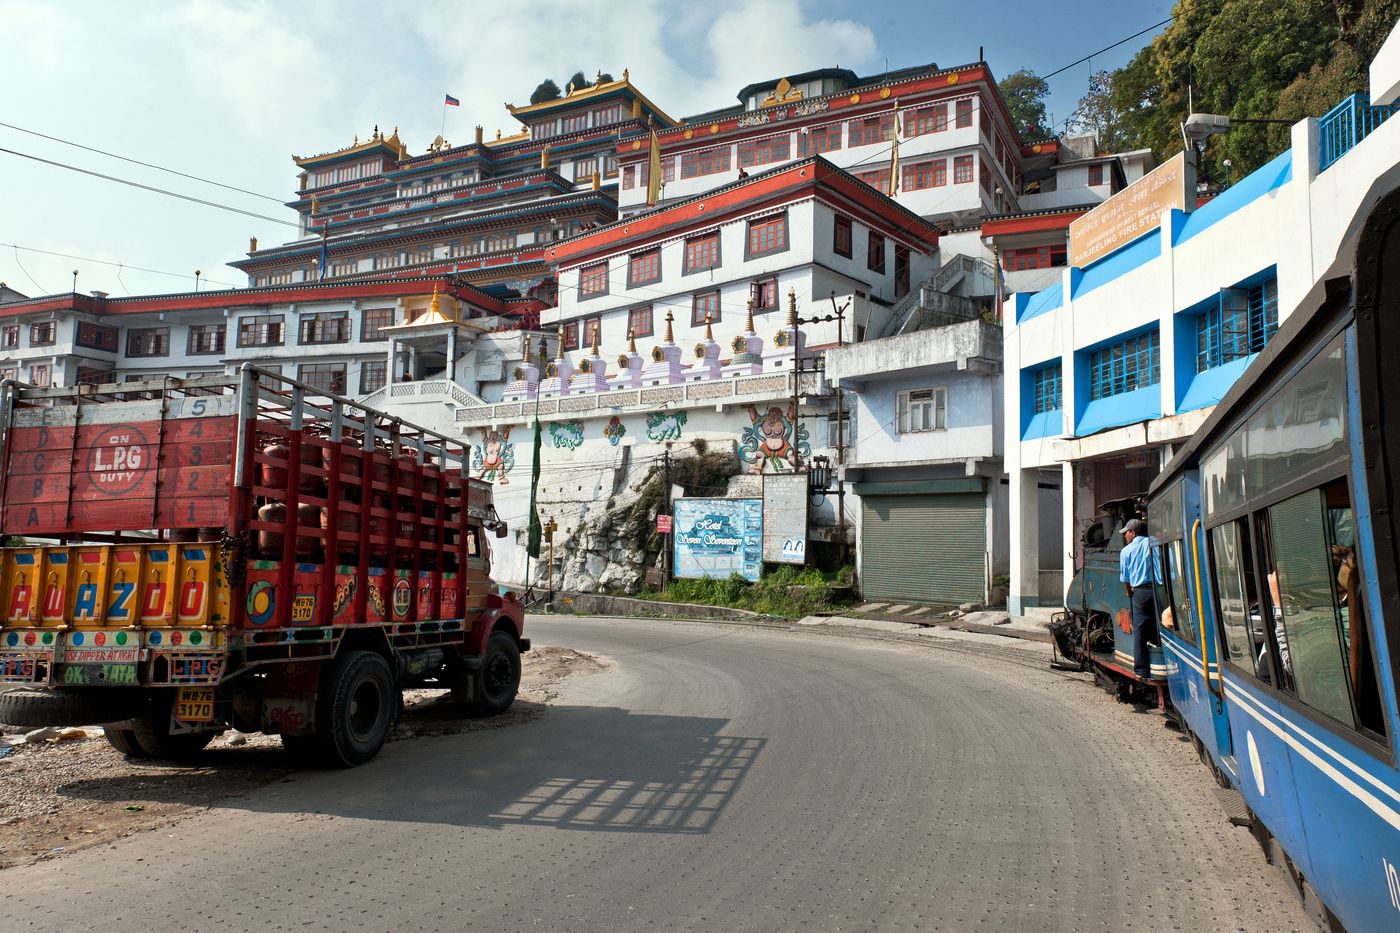 The Darjeeling Toy Train turns left alongside the highway while crossing the Yiga Choeling monastery of Ghum